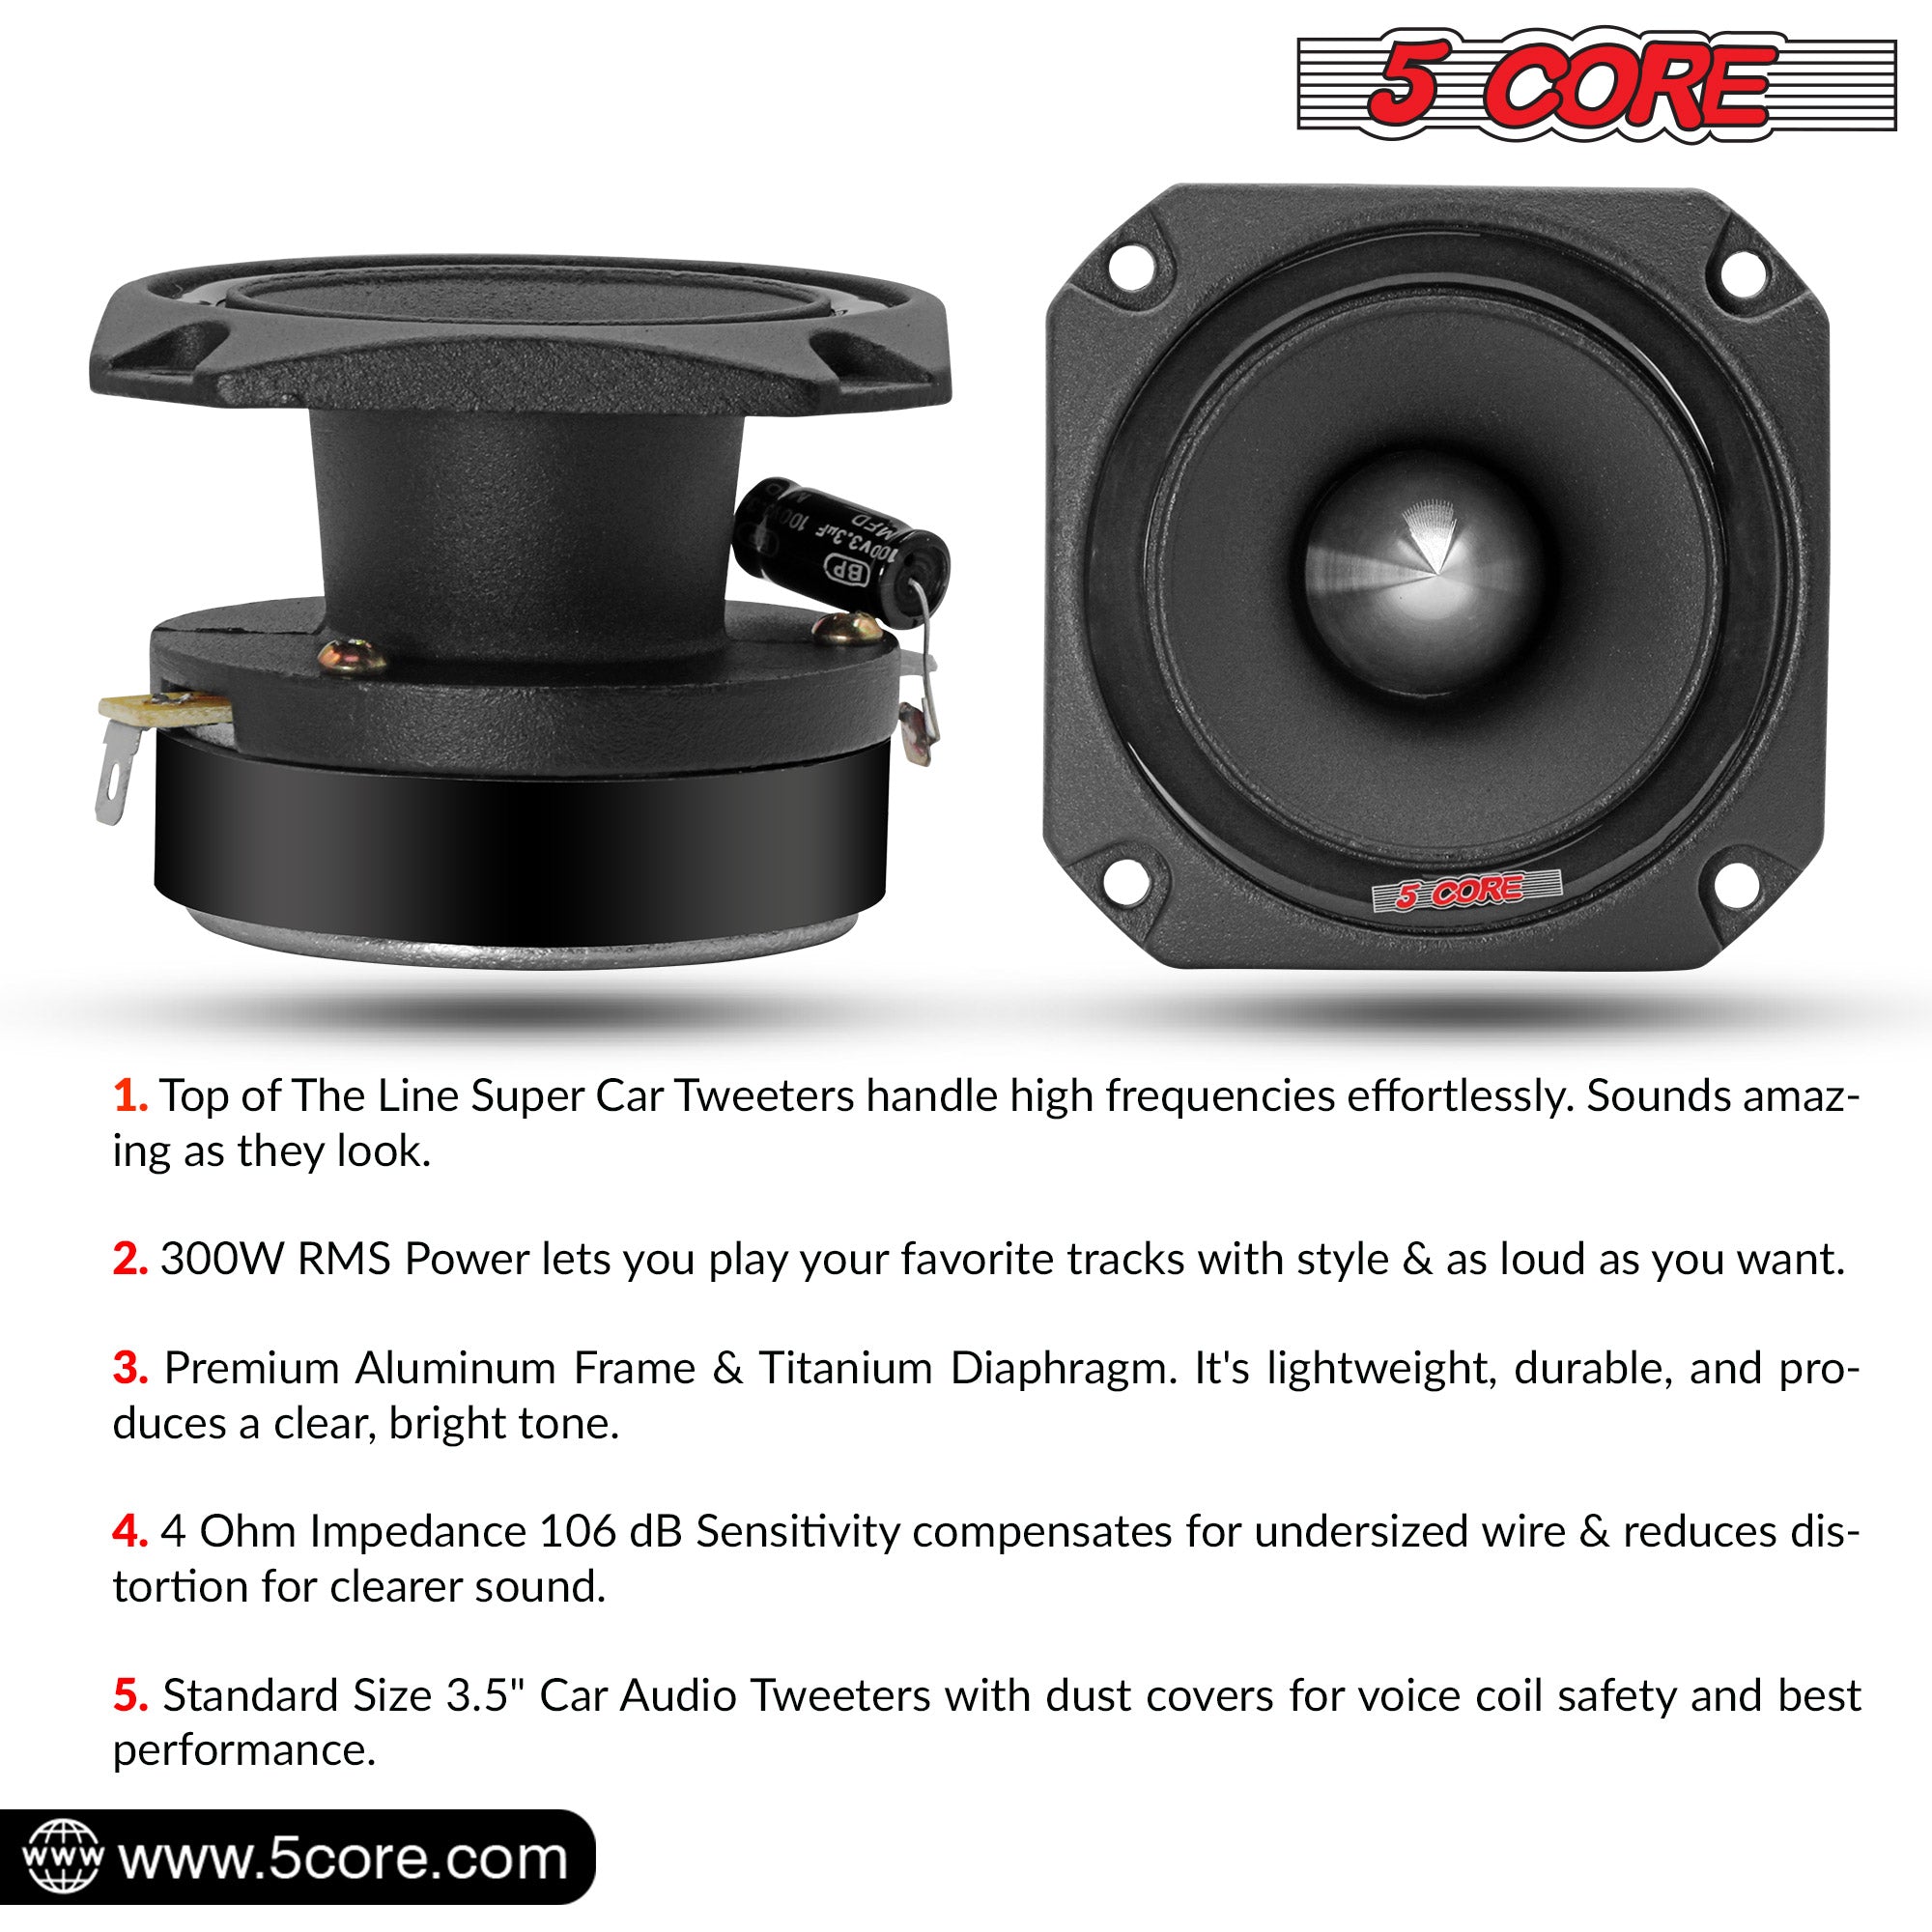 5 Core Super Bullet Car Tweeters deliver 300W RMS and 520W Max power for outstanding audio output and clarity.